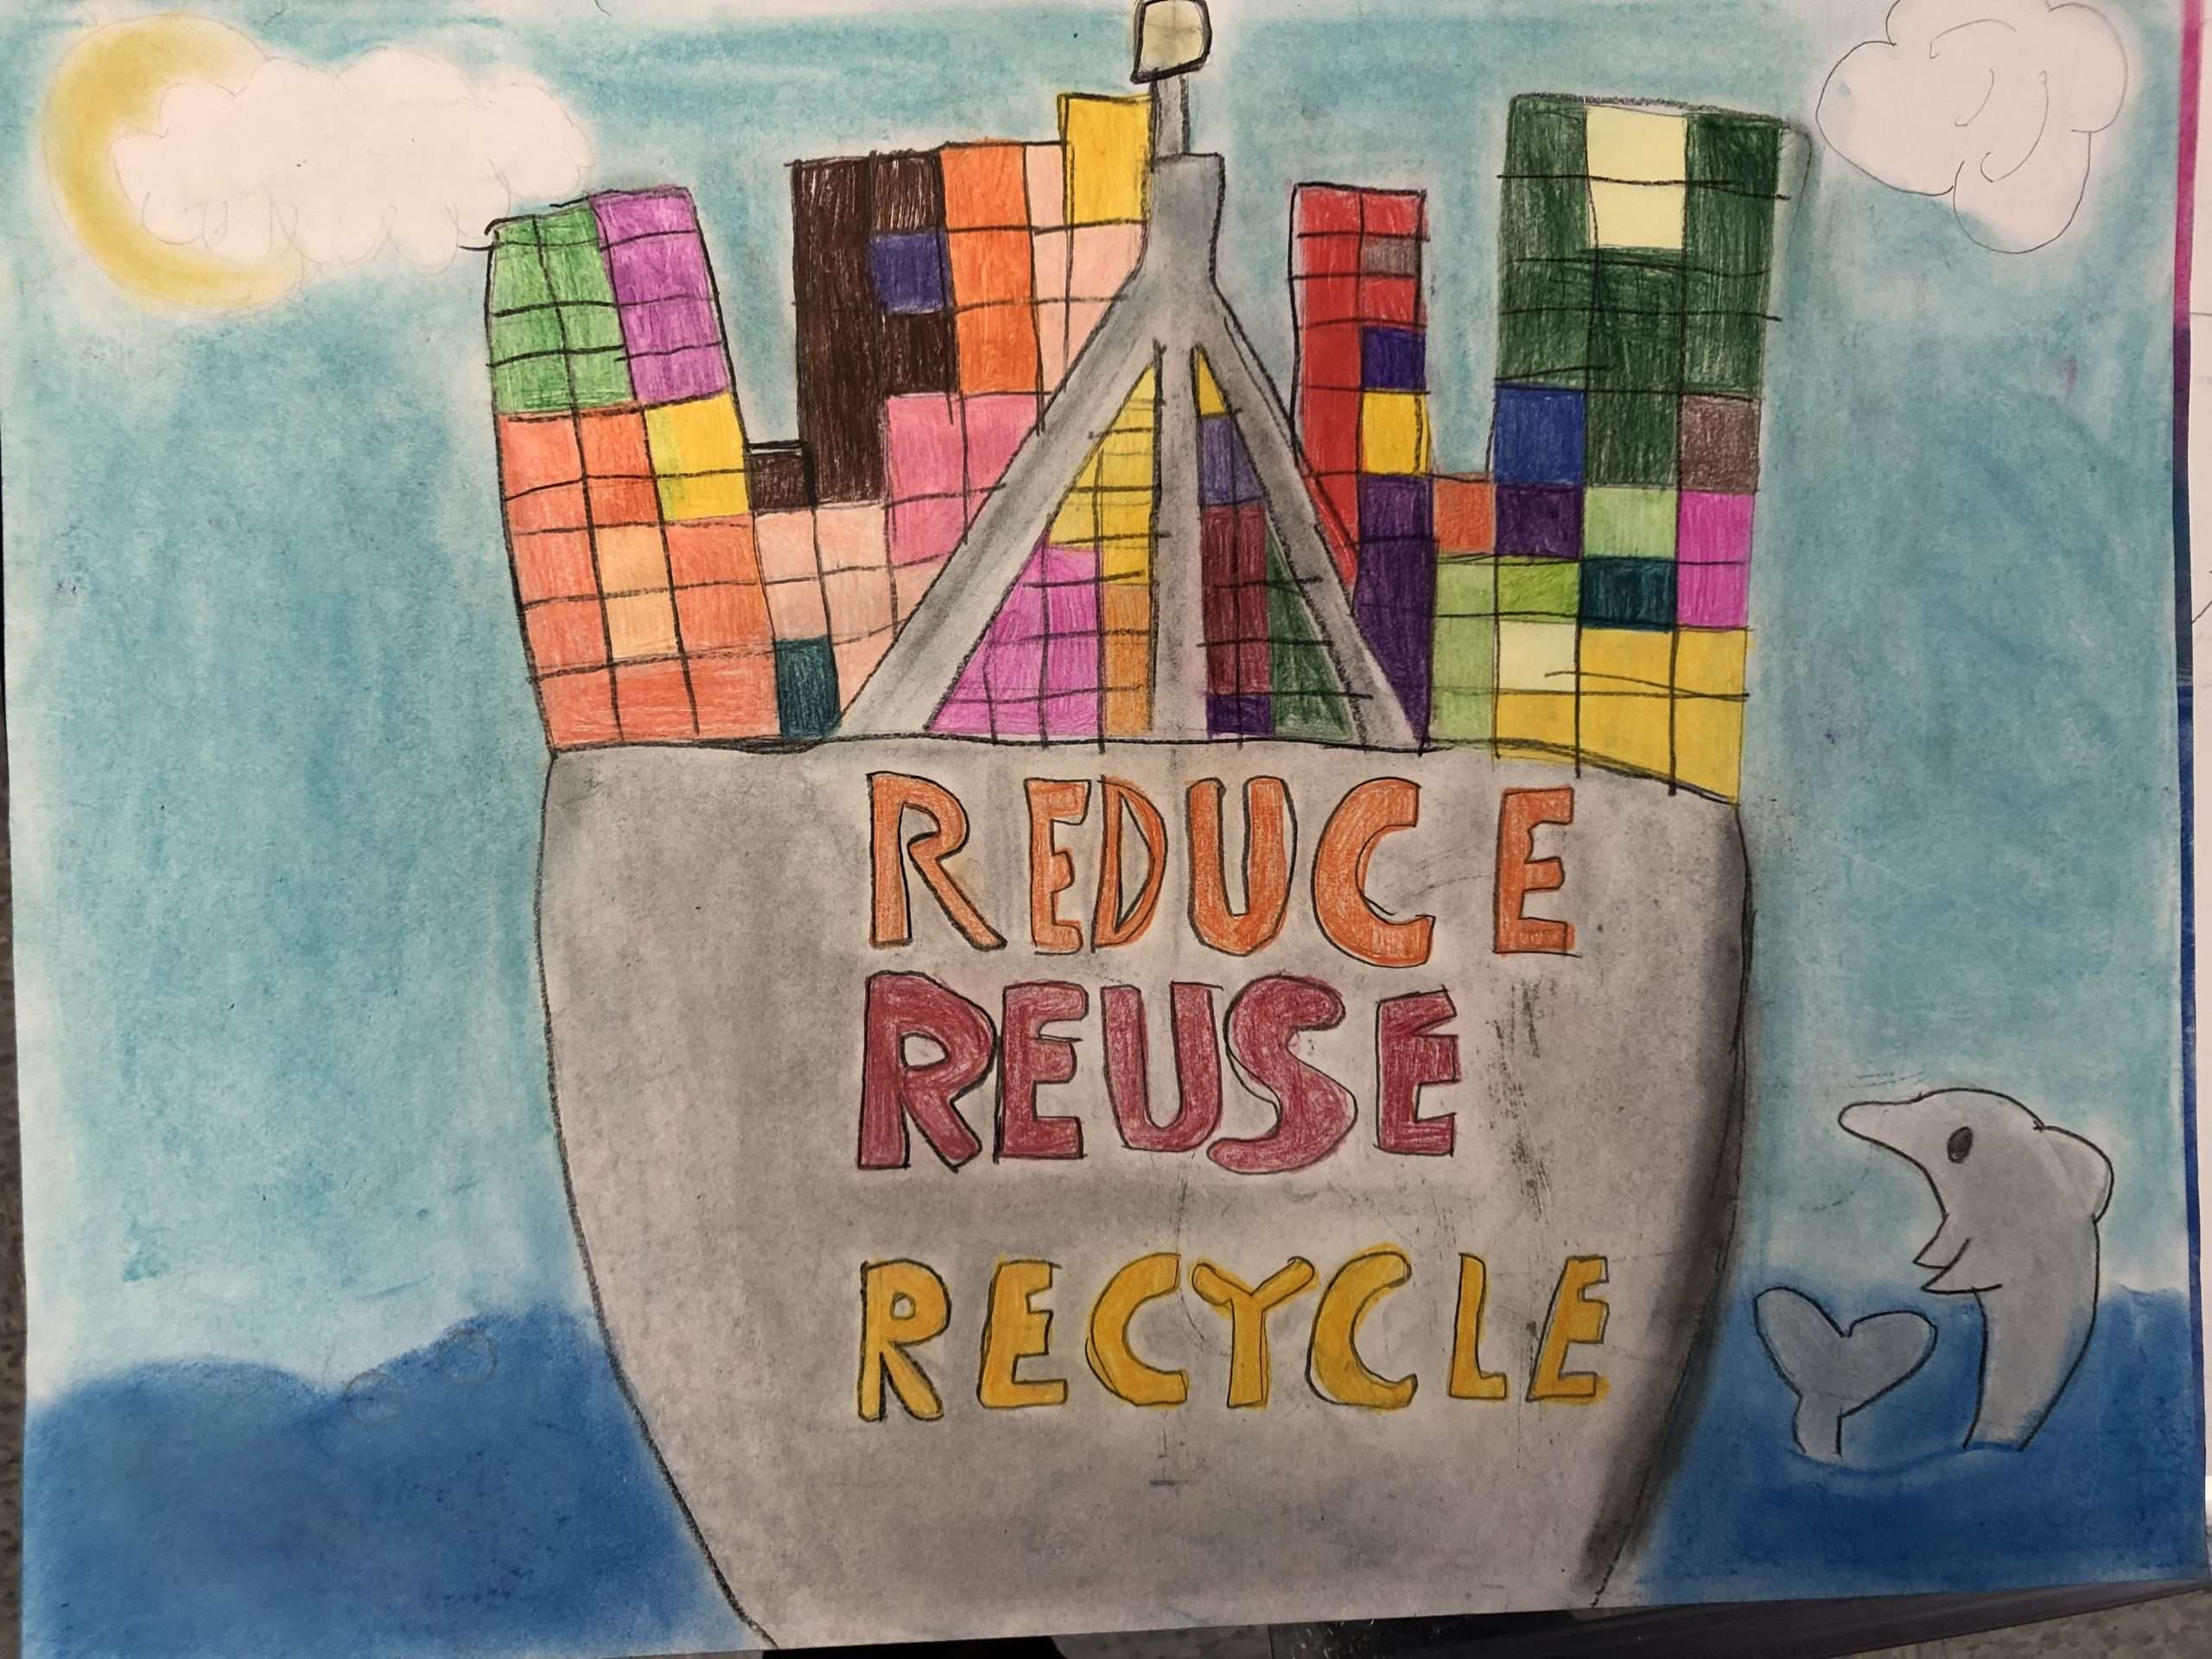 Drawing of the back of a gray ship on the ocean holding several shipping containers. Text on the ship reads "Reduce Reuse Recycle." There is a dolphin jumping out of the water on the right side of the ship.